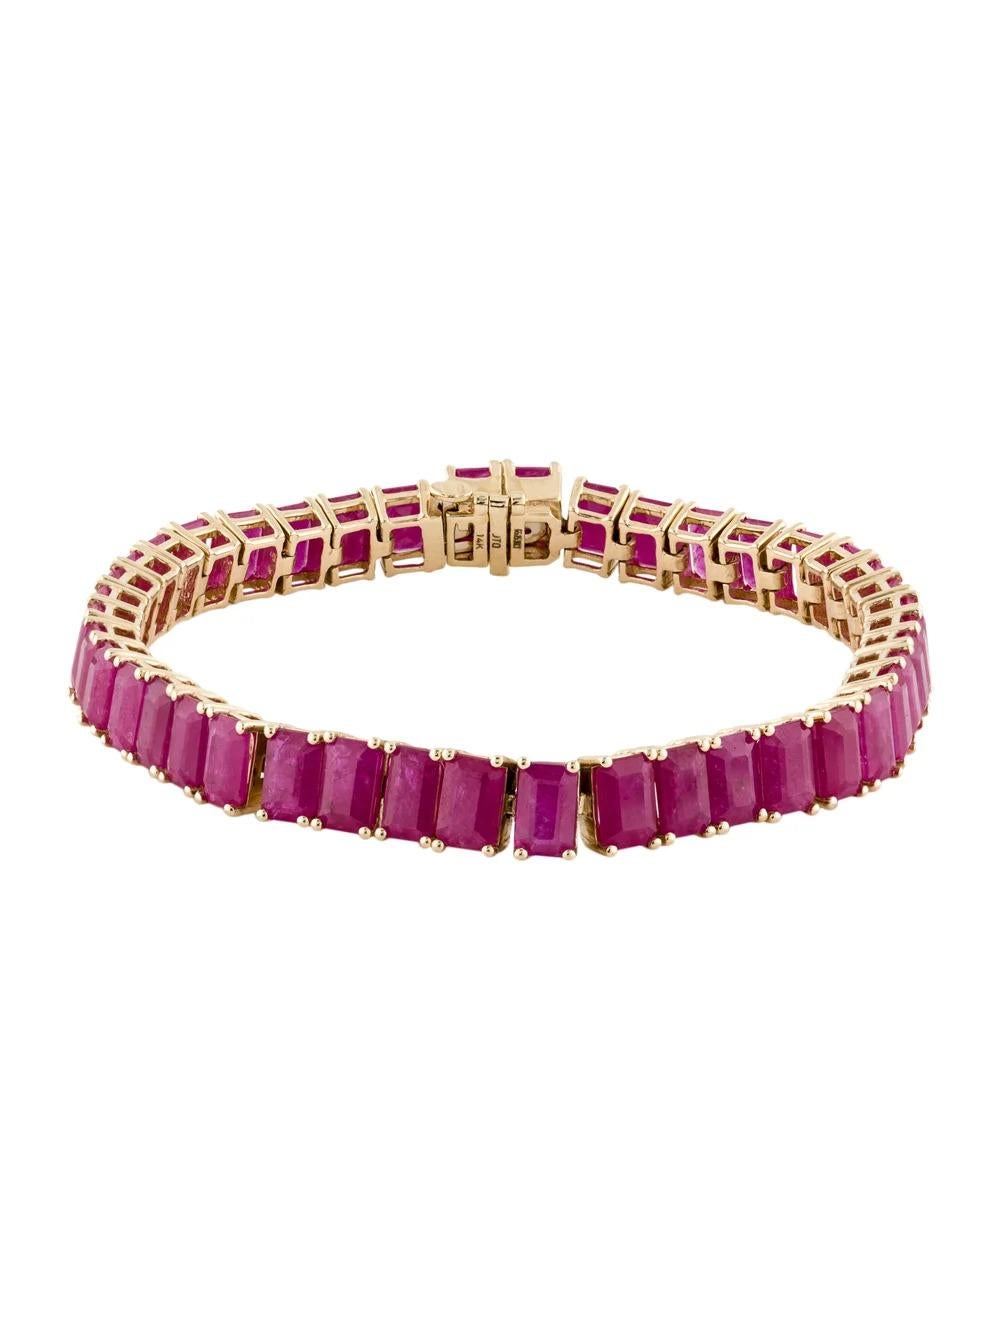 Elevate your jewelry collection with this stunning 14K Yellow Gold Ruby Link Bracelet, boasting a remarkable 26.00 carat Cut Cornered Rectangular Step Cut Ruby. Crafted to perfection, this exquisite piece exudes luxury and